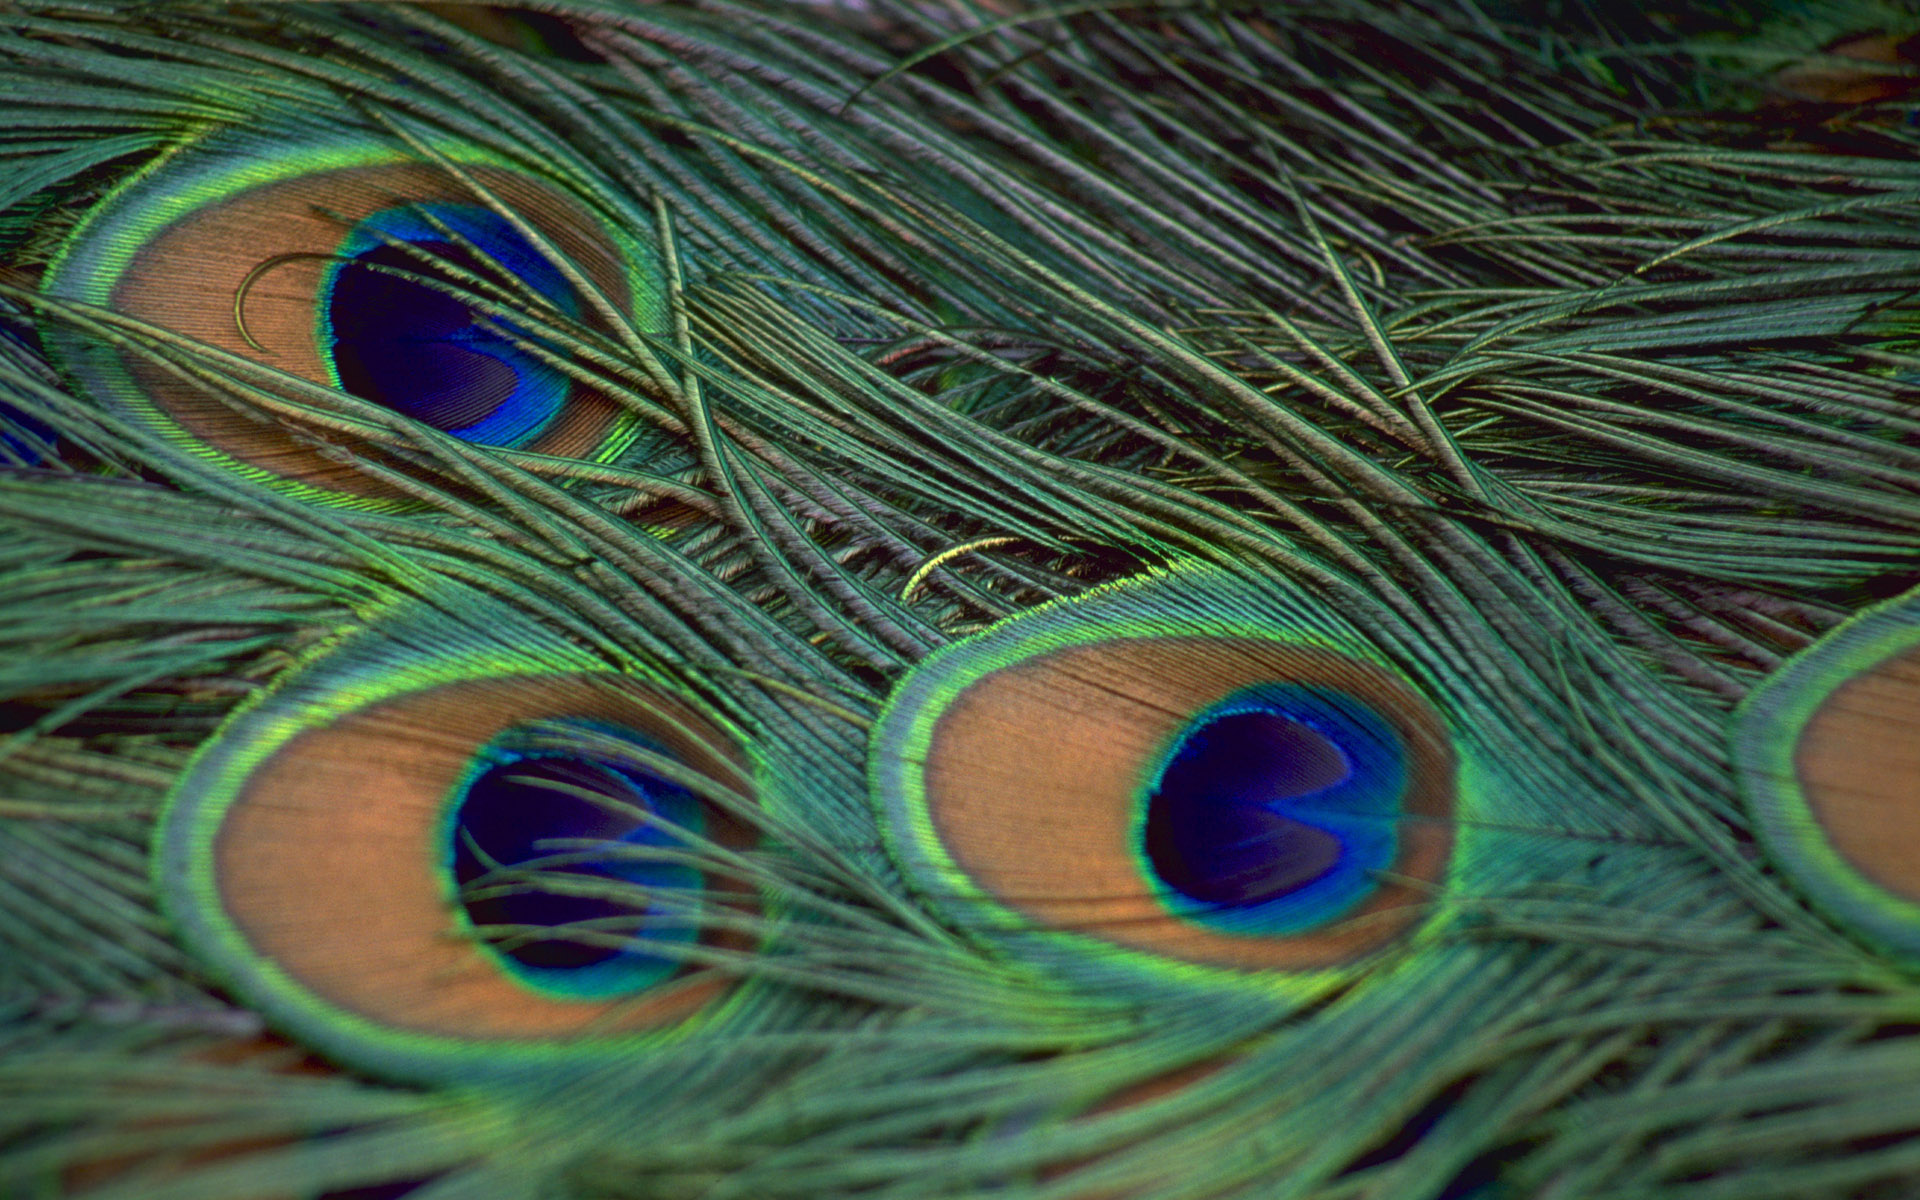 Peacock Feathers Wallpaper And Image Pictures Photos